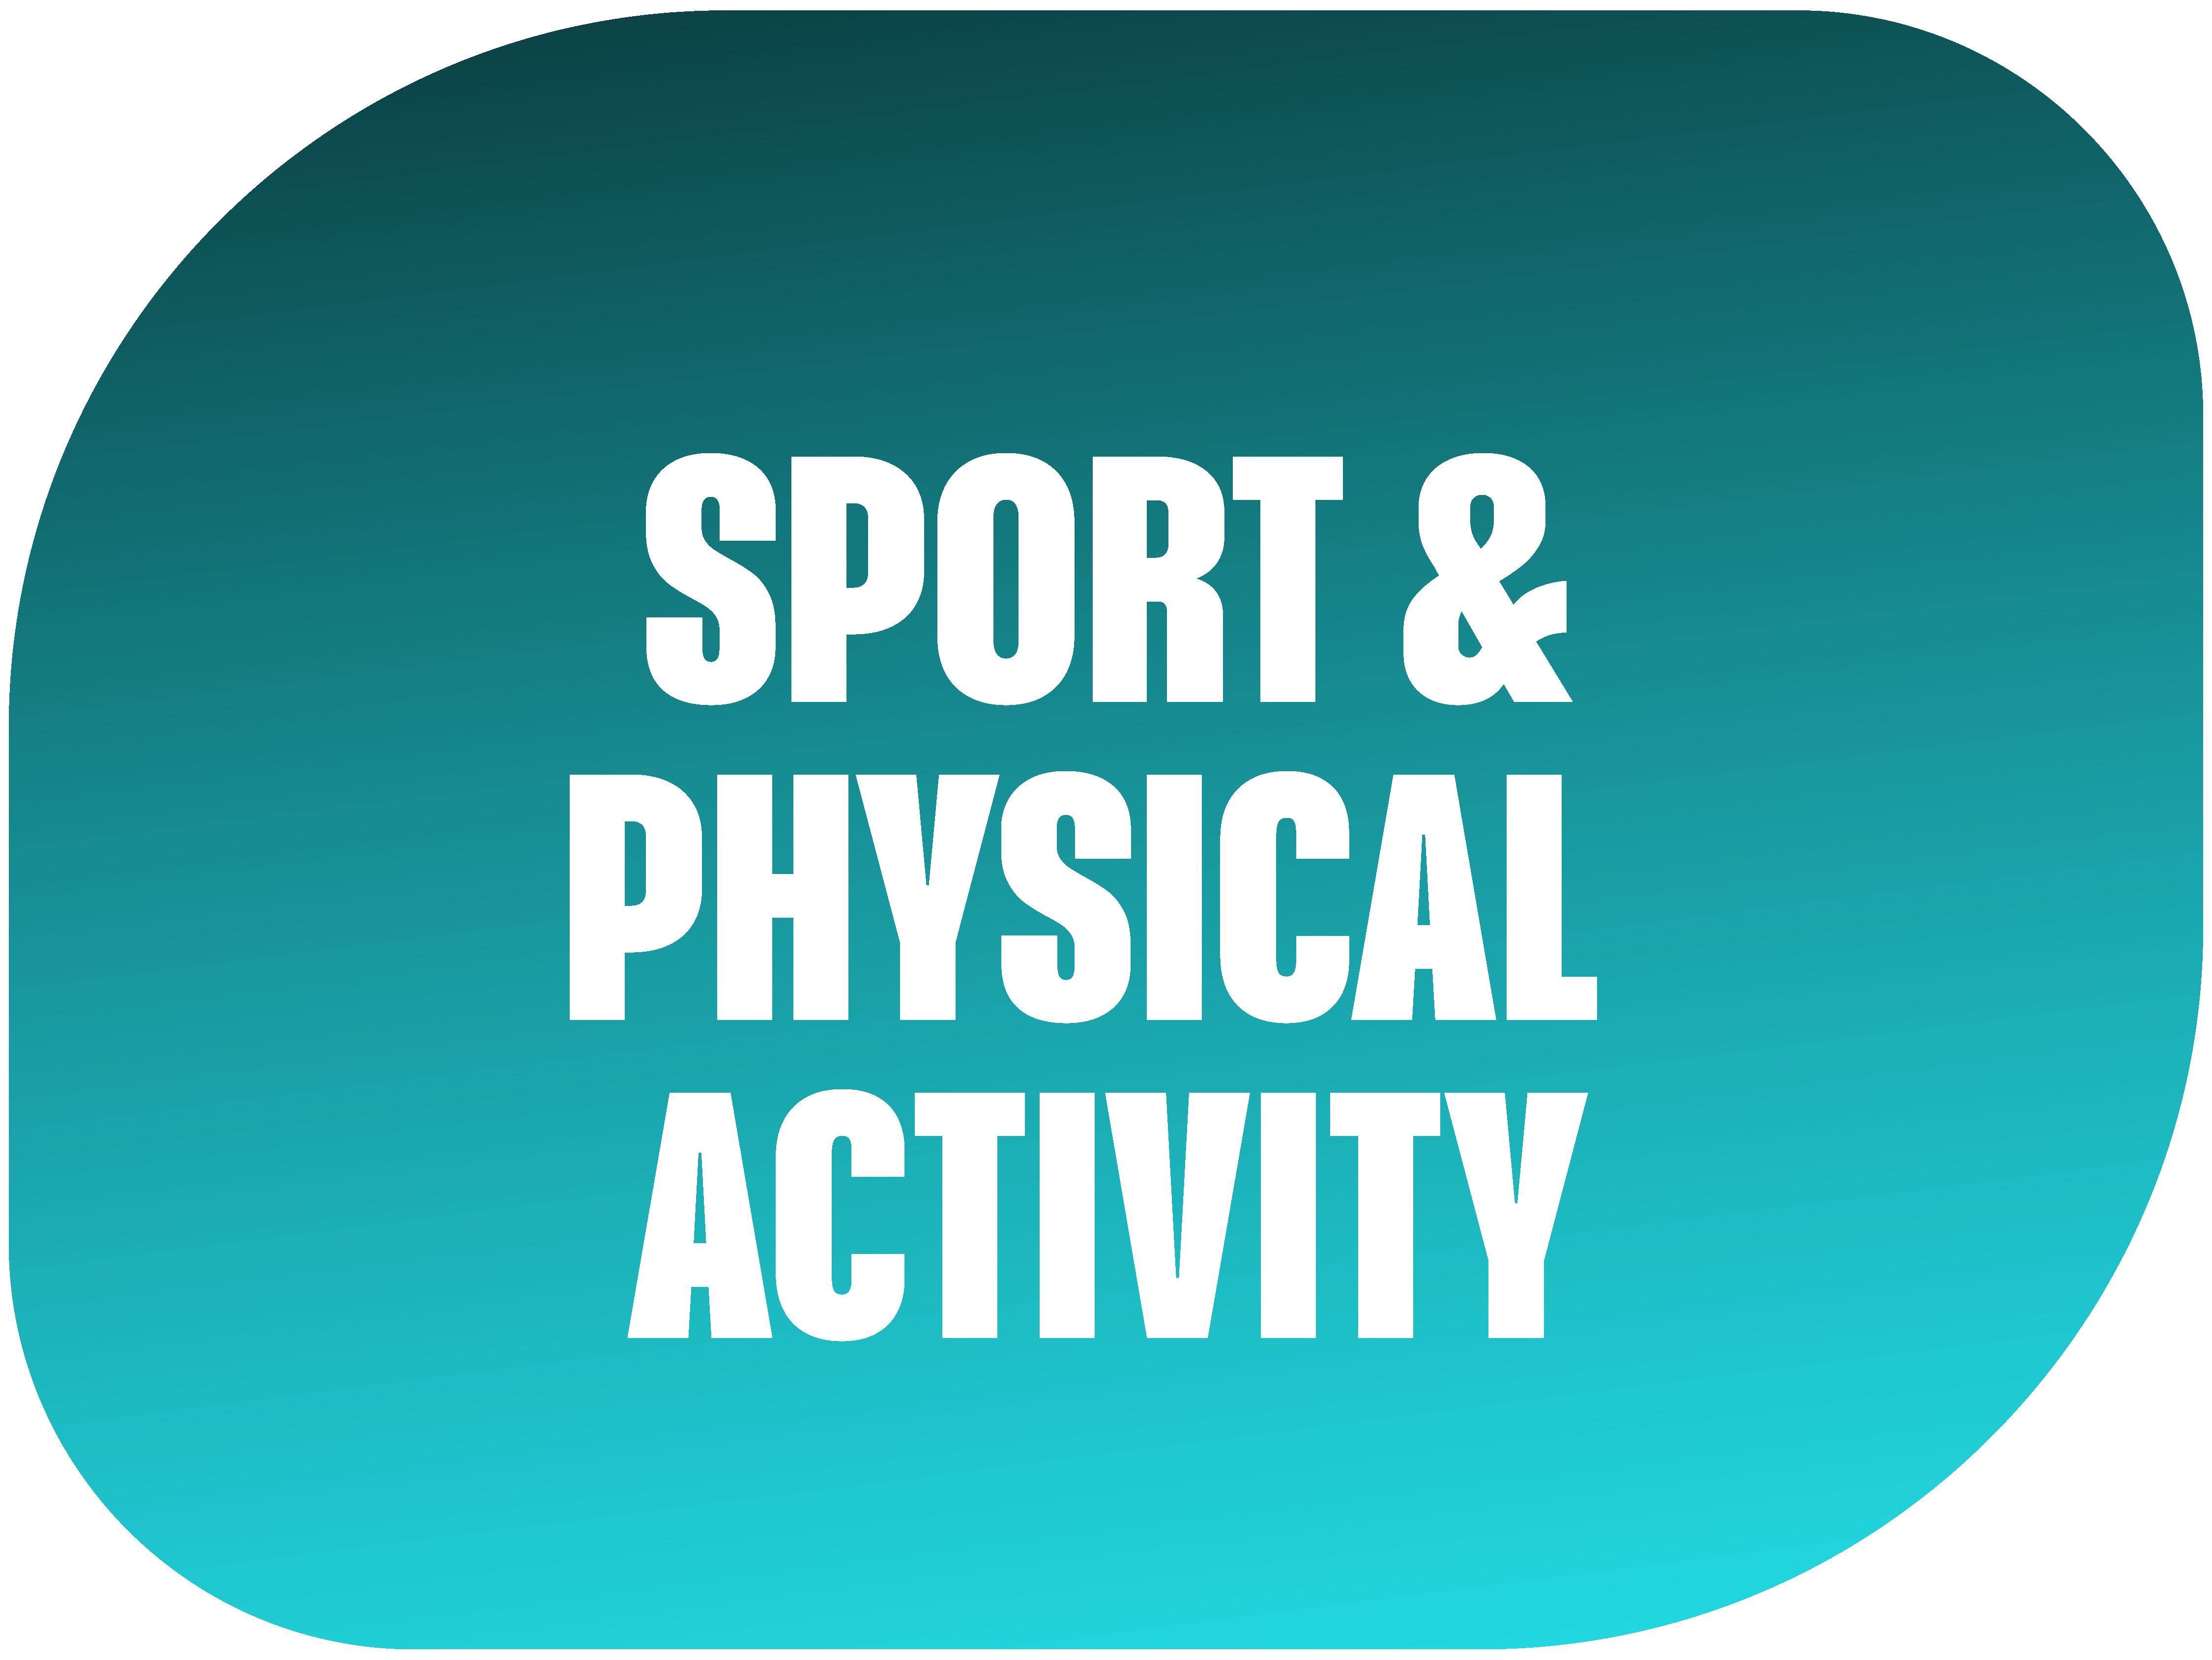 Sport & Physical Activity 